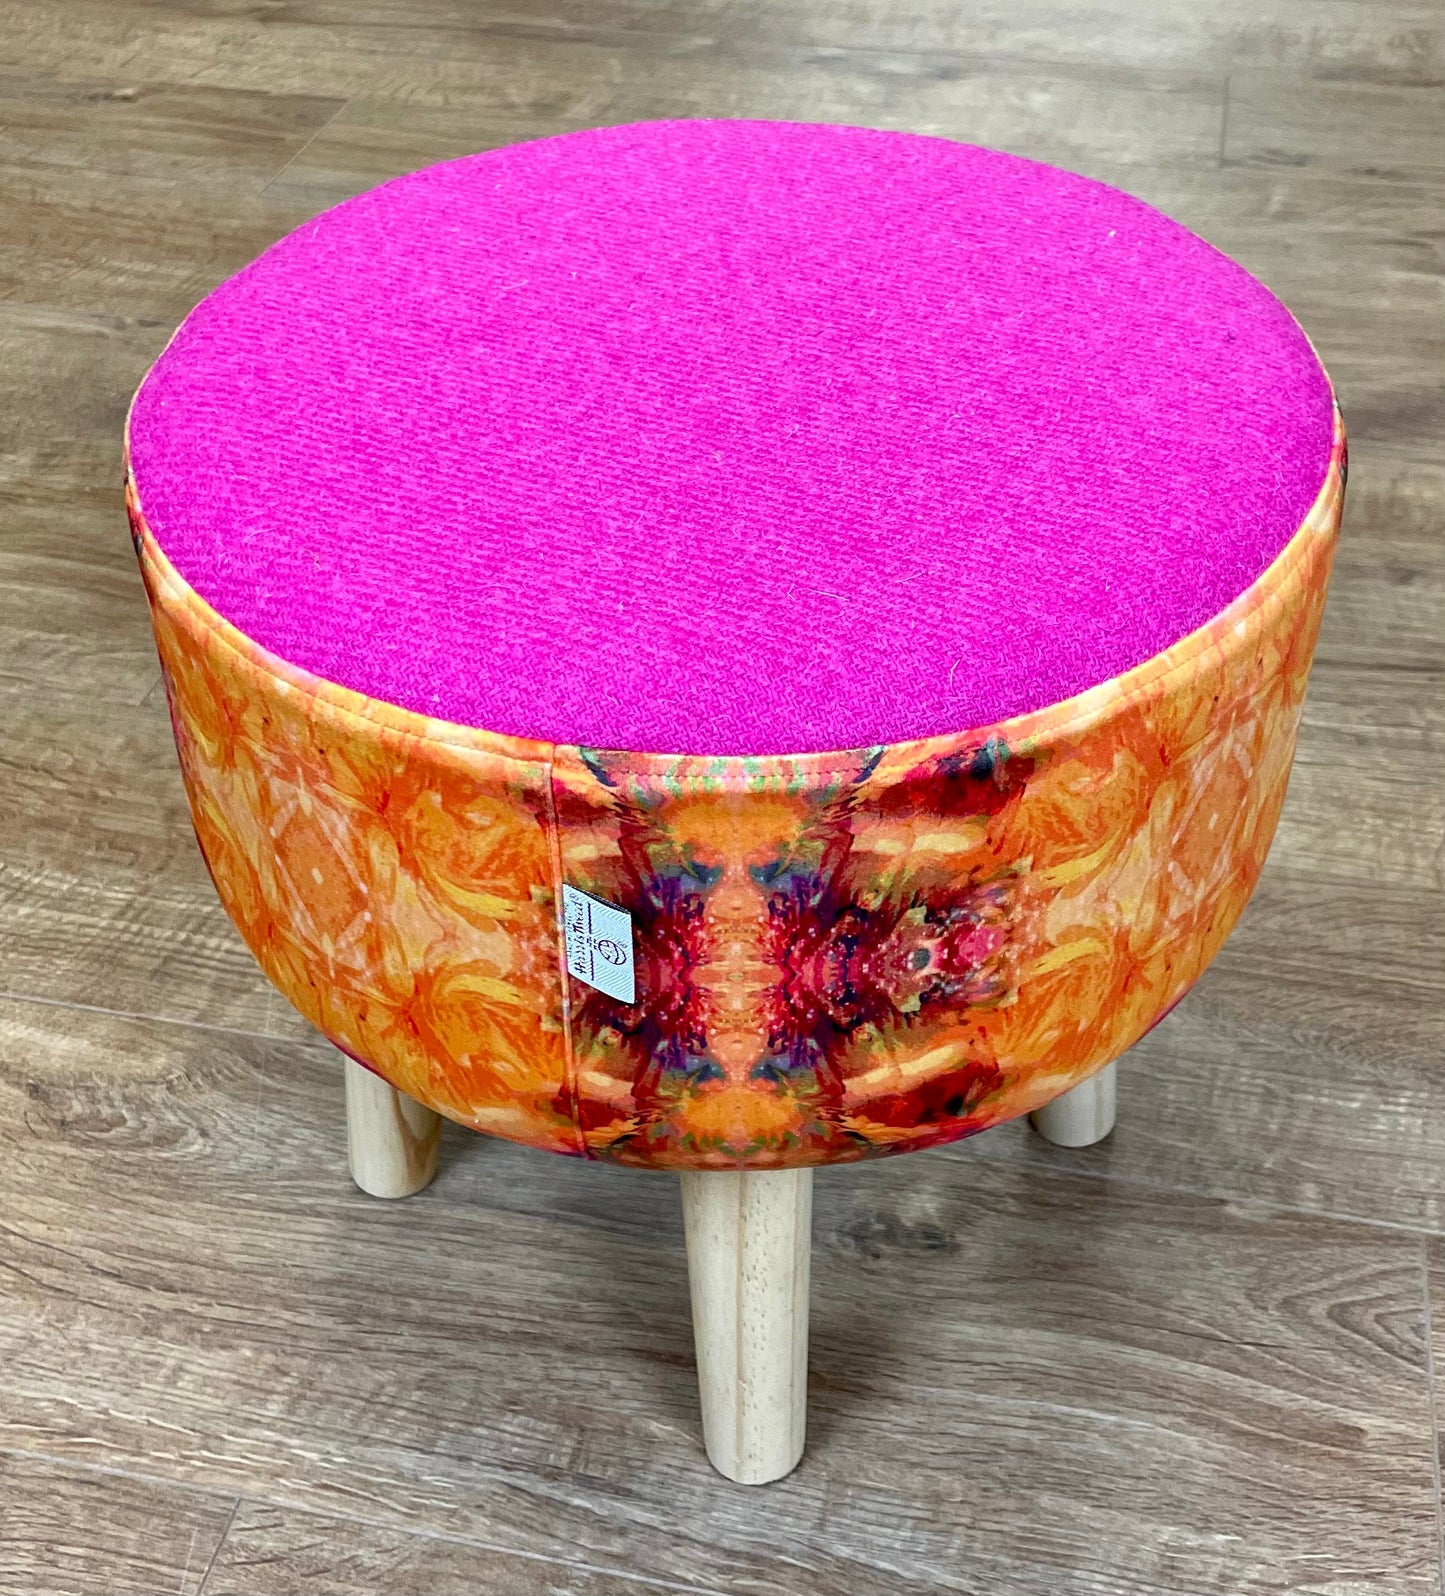 Fire Velvet and Bright Pink Harris Tweed Upholstered Footstool with Light Rustic Wooden Legs.